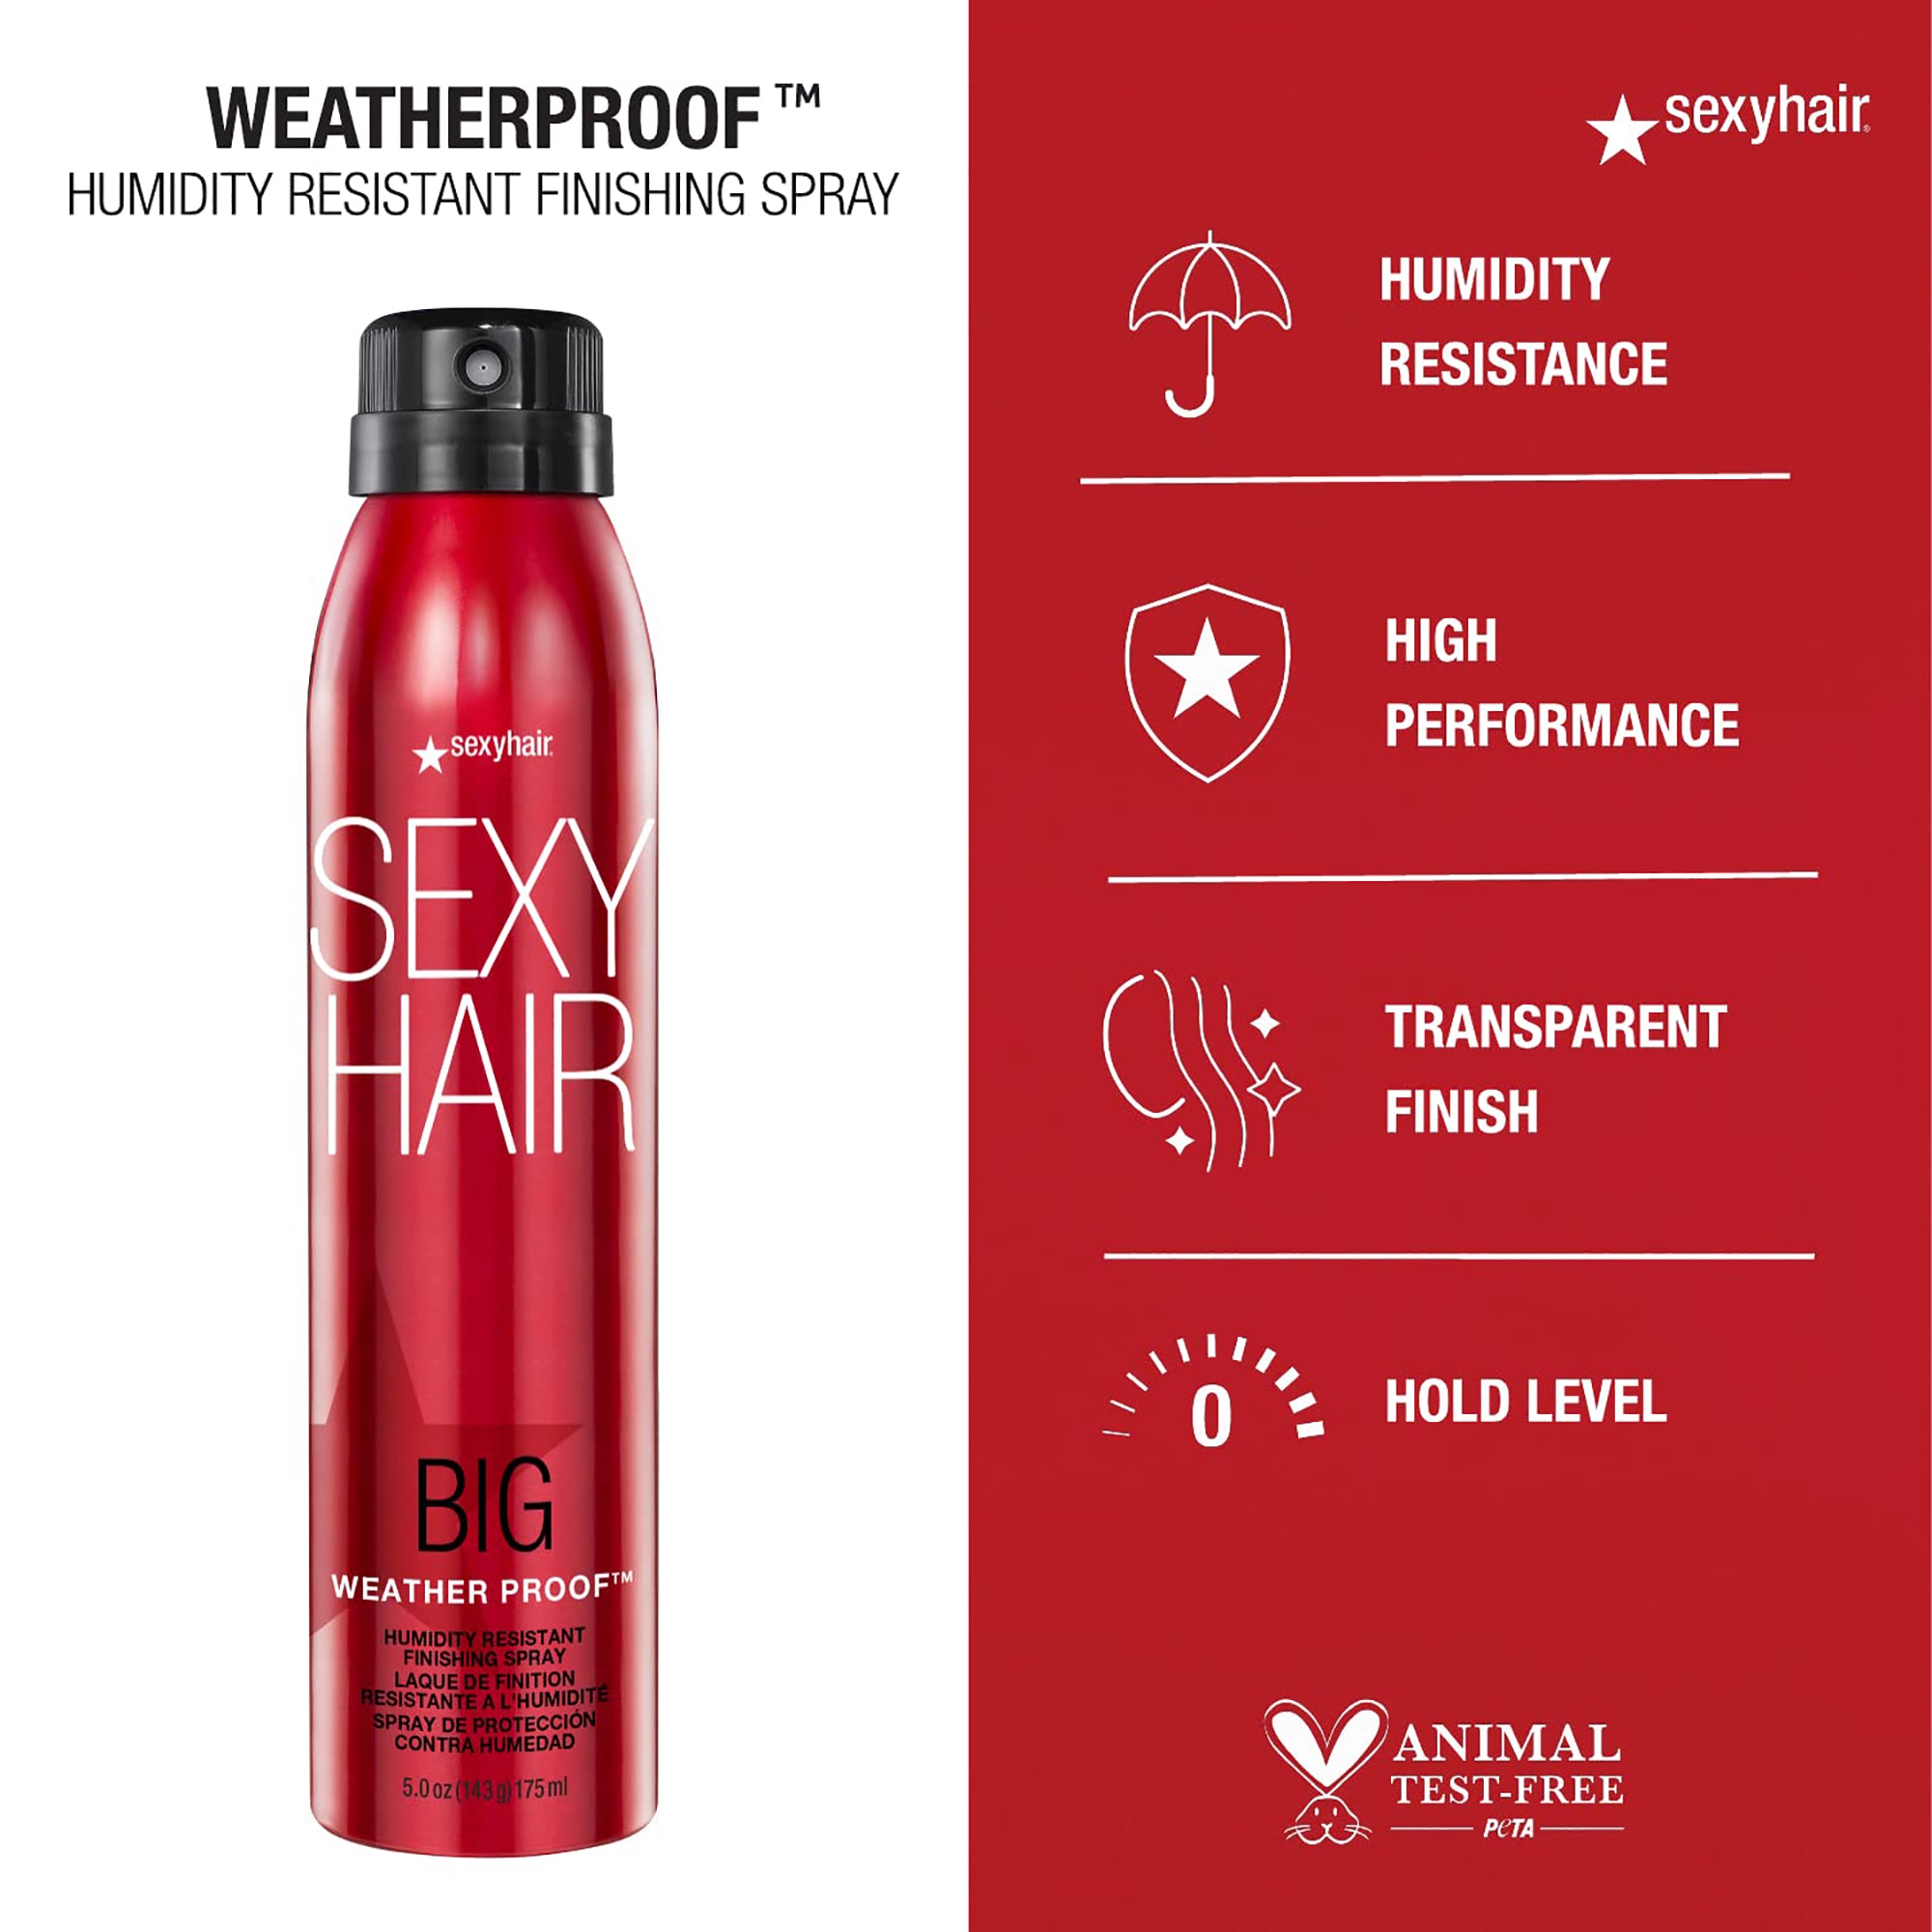 Sexy Hair Big SexyHair Weather Proof Humidity Resistant Finishing Spray / 5OZ